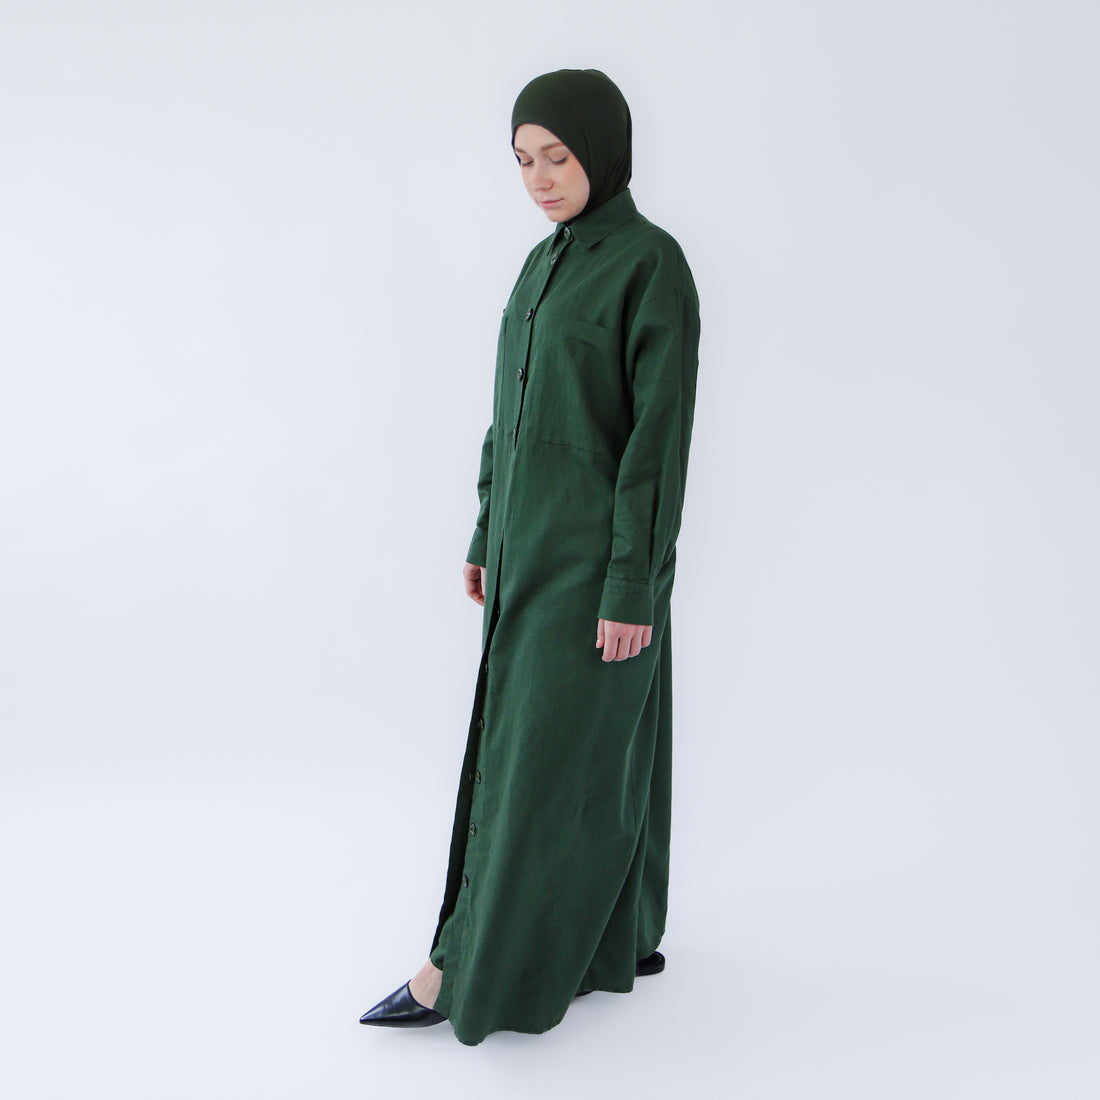 Abaya dress style maxi dress for women with wide trousers "Linen"